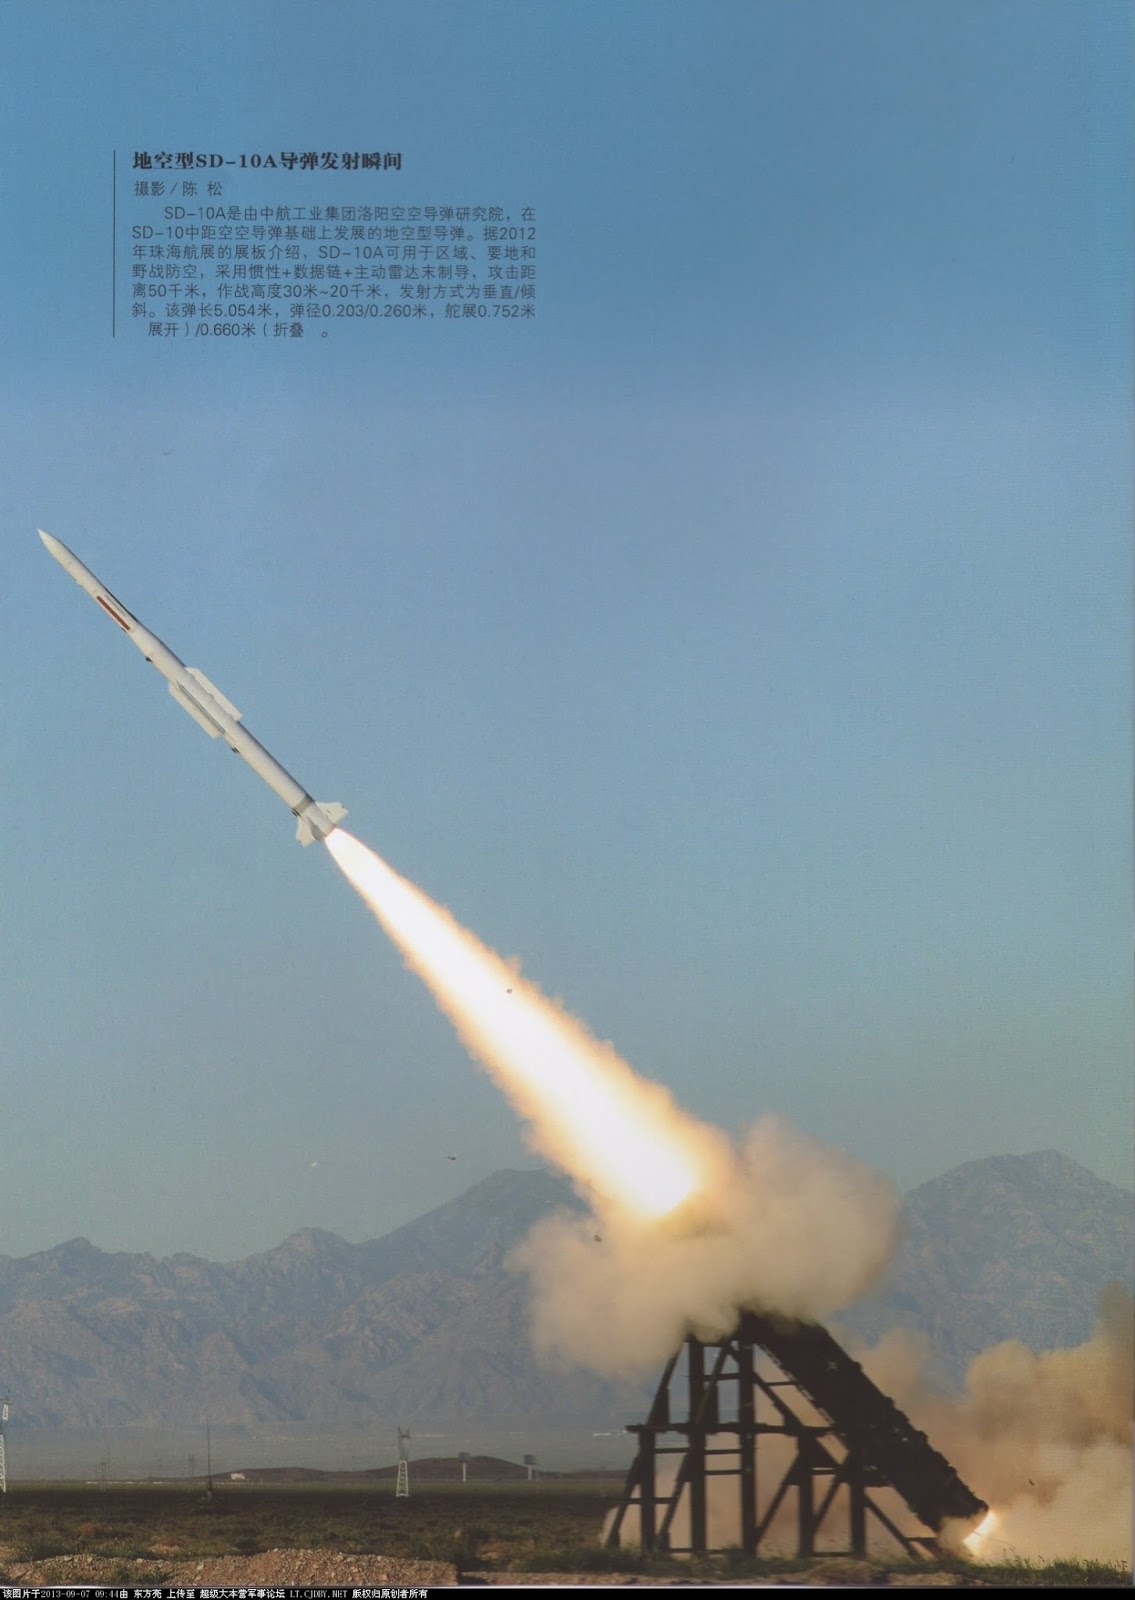 China - El nuevo sistema SAM de Alcance Medio SD-10A "Dragon del Cielo"  PL-12+version+-+SD-10ABCD+NORINCO+Sky+Dragon+Medium-Range+SAM+System++range+of+medium+altitude+Surface-to-Air+Missile+(SAM)+export+pakistan+navy+air+force+plaaf+china+chinese+area+air+defence+missile+system+simultaneously+(1)